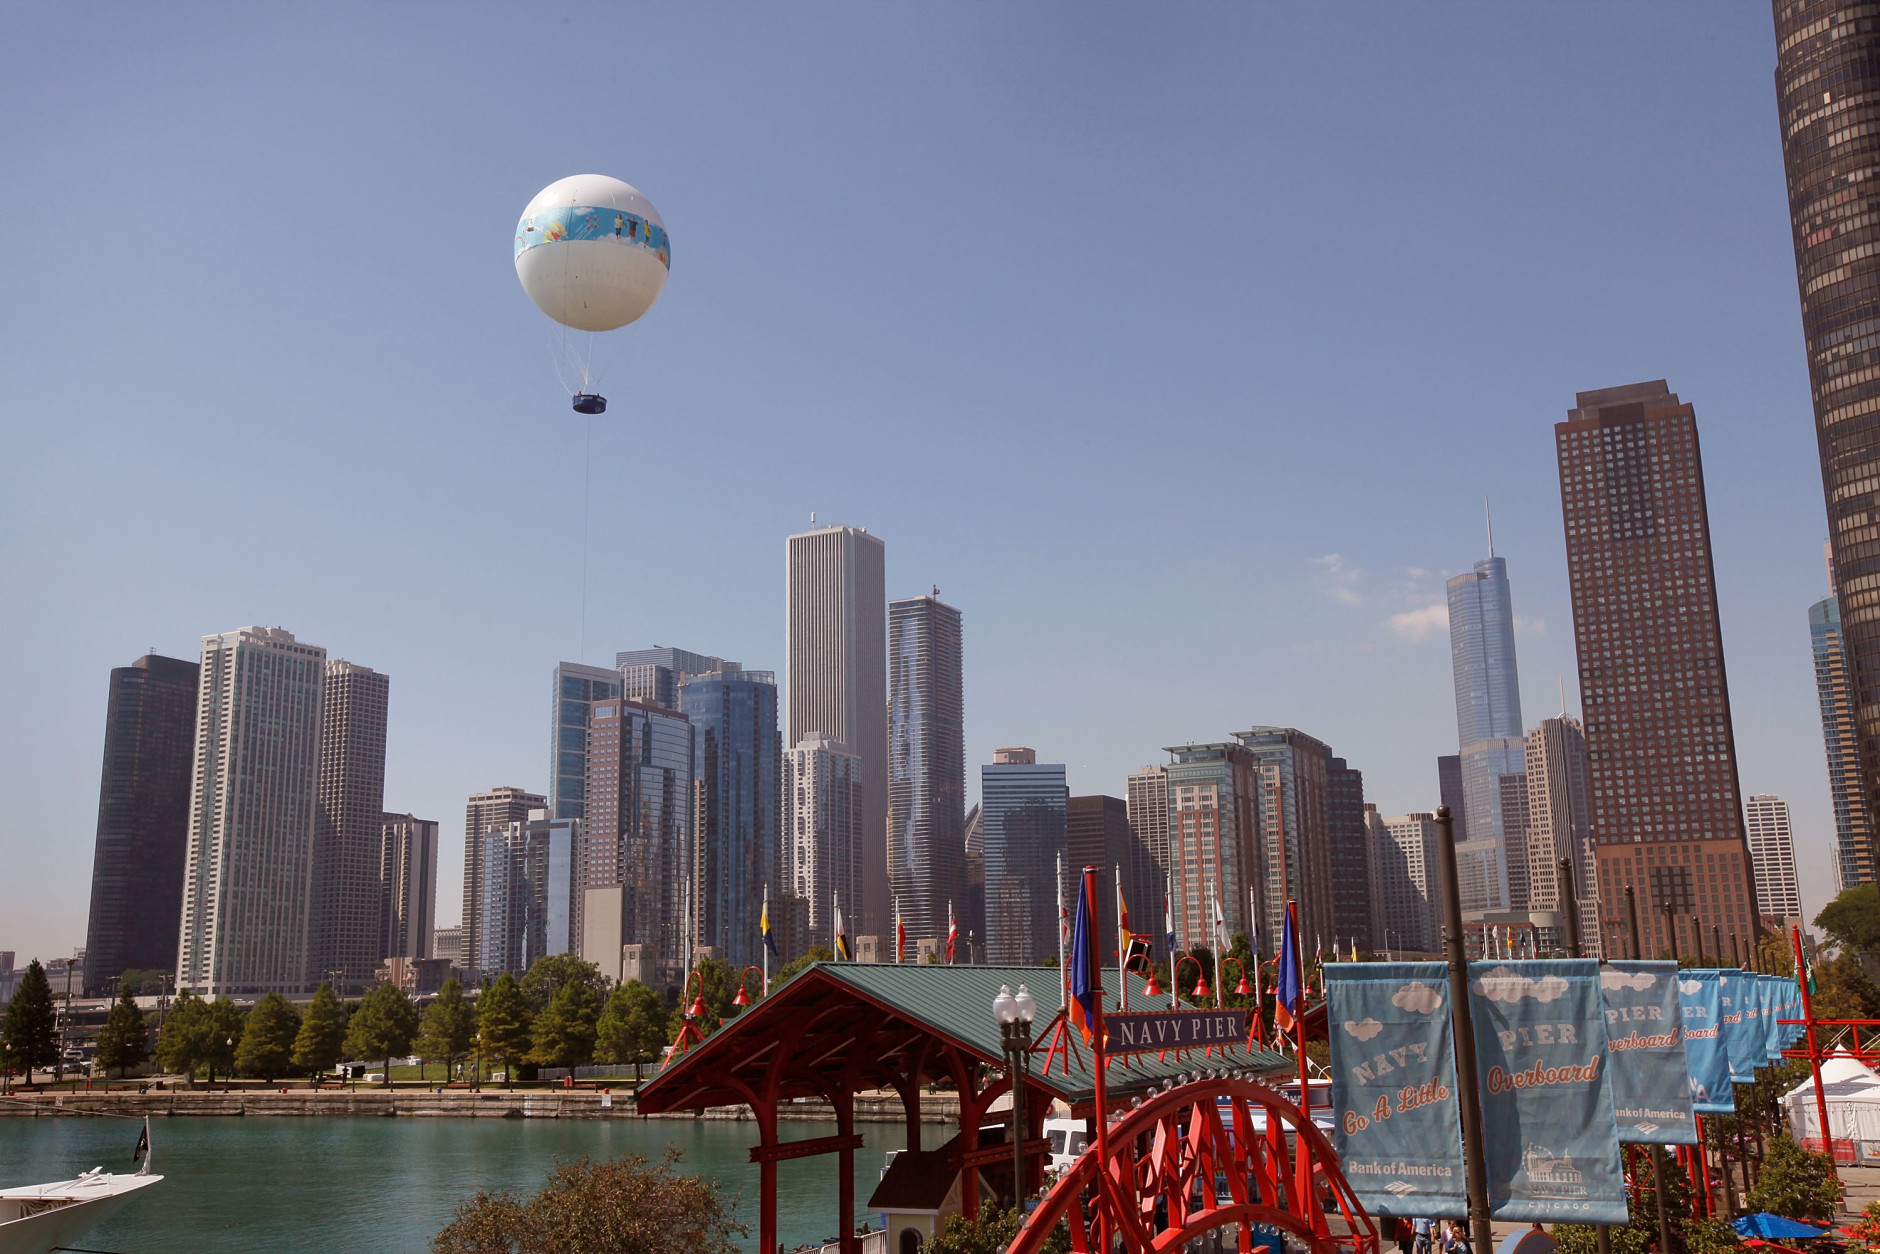 CHICAGO - SEPTEMBER 02:  Passengers get an aerial view of the city while riding the AeroBalloon at Navy Pier September 2, 2009 in Chicago, Illinois.  The helium-filled balloon, which opened for riders today, is tethered to the ground along Chicago's lakefront. The balloon ascends to 350 feet can hold up to 18 passengers.  (Photo by Scott Olson/Getty Images)